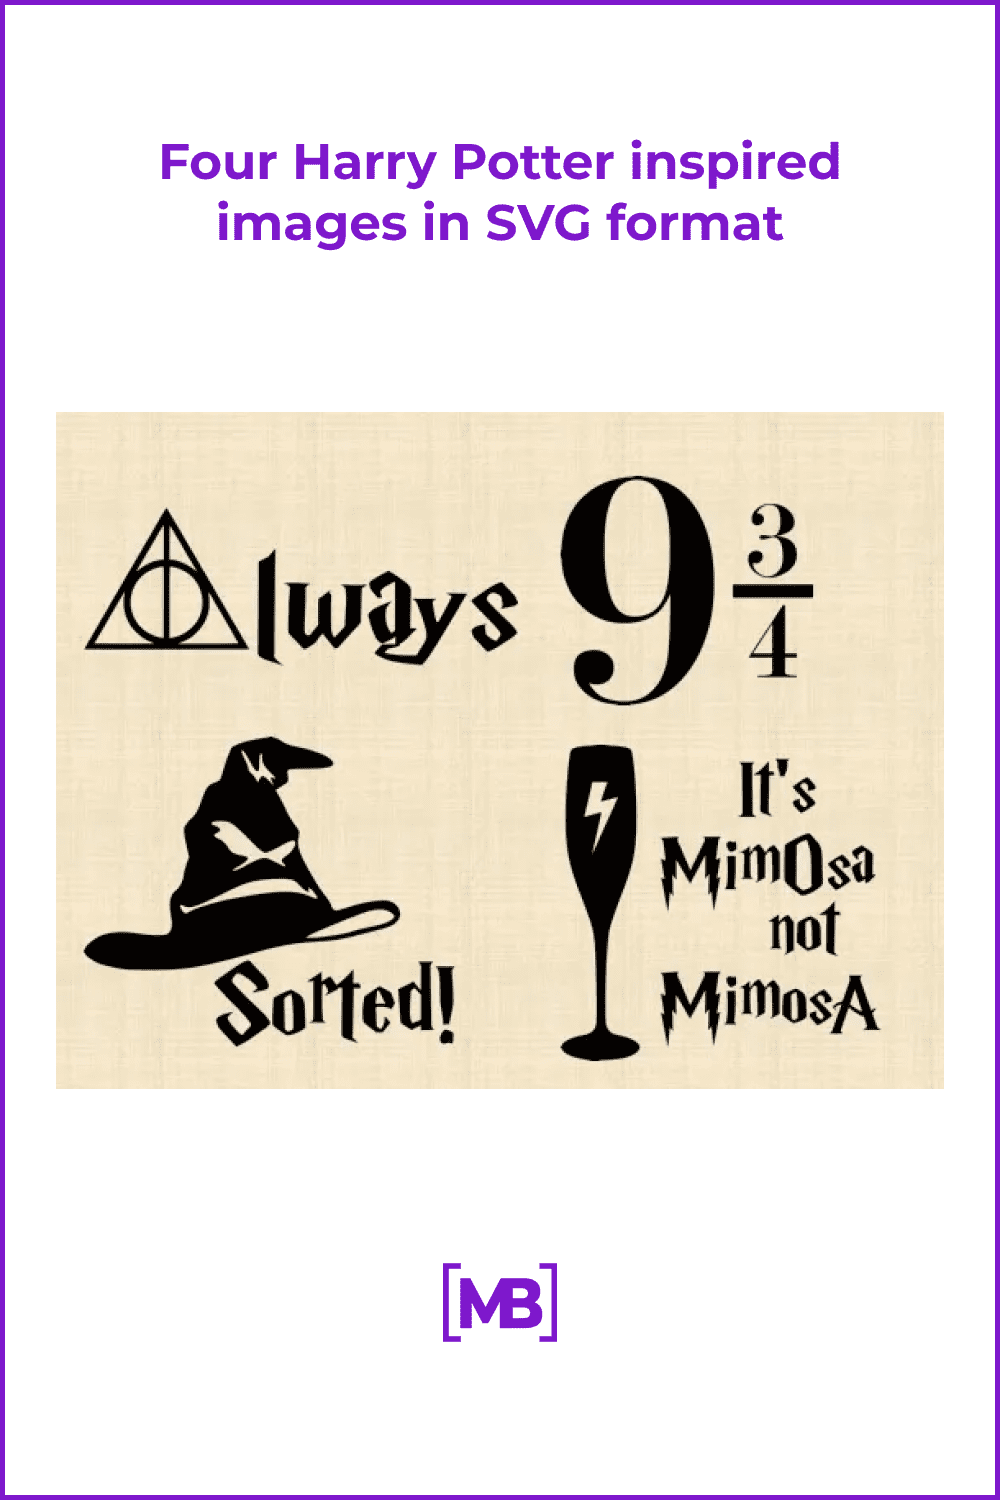 Four harry potter inspired images in SVG format.